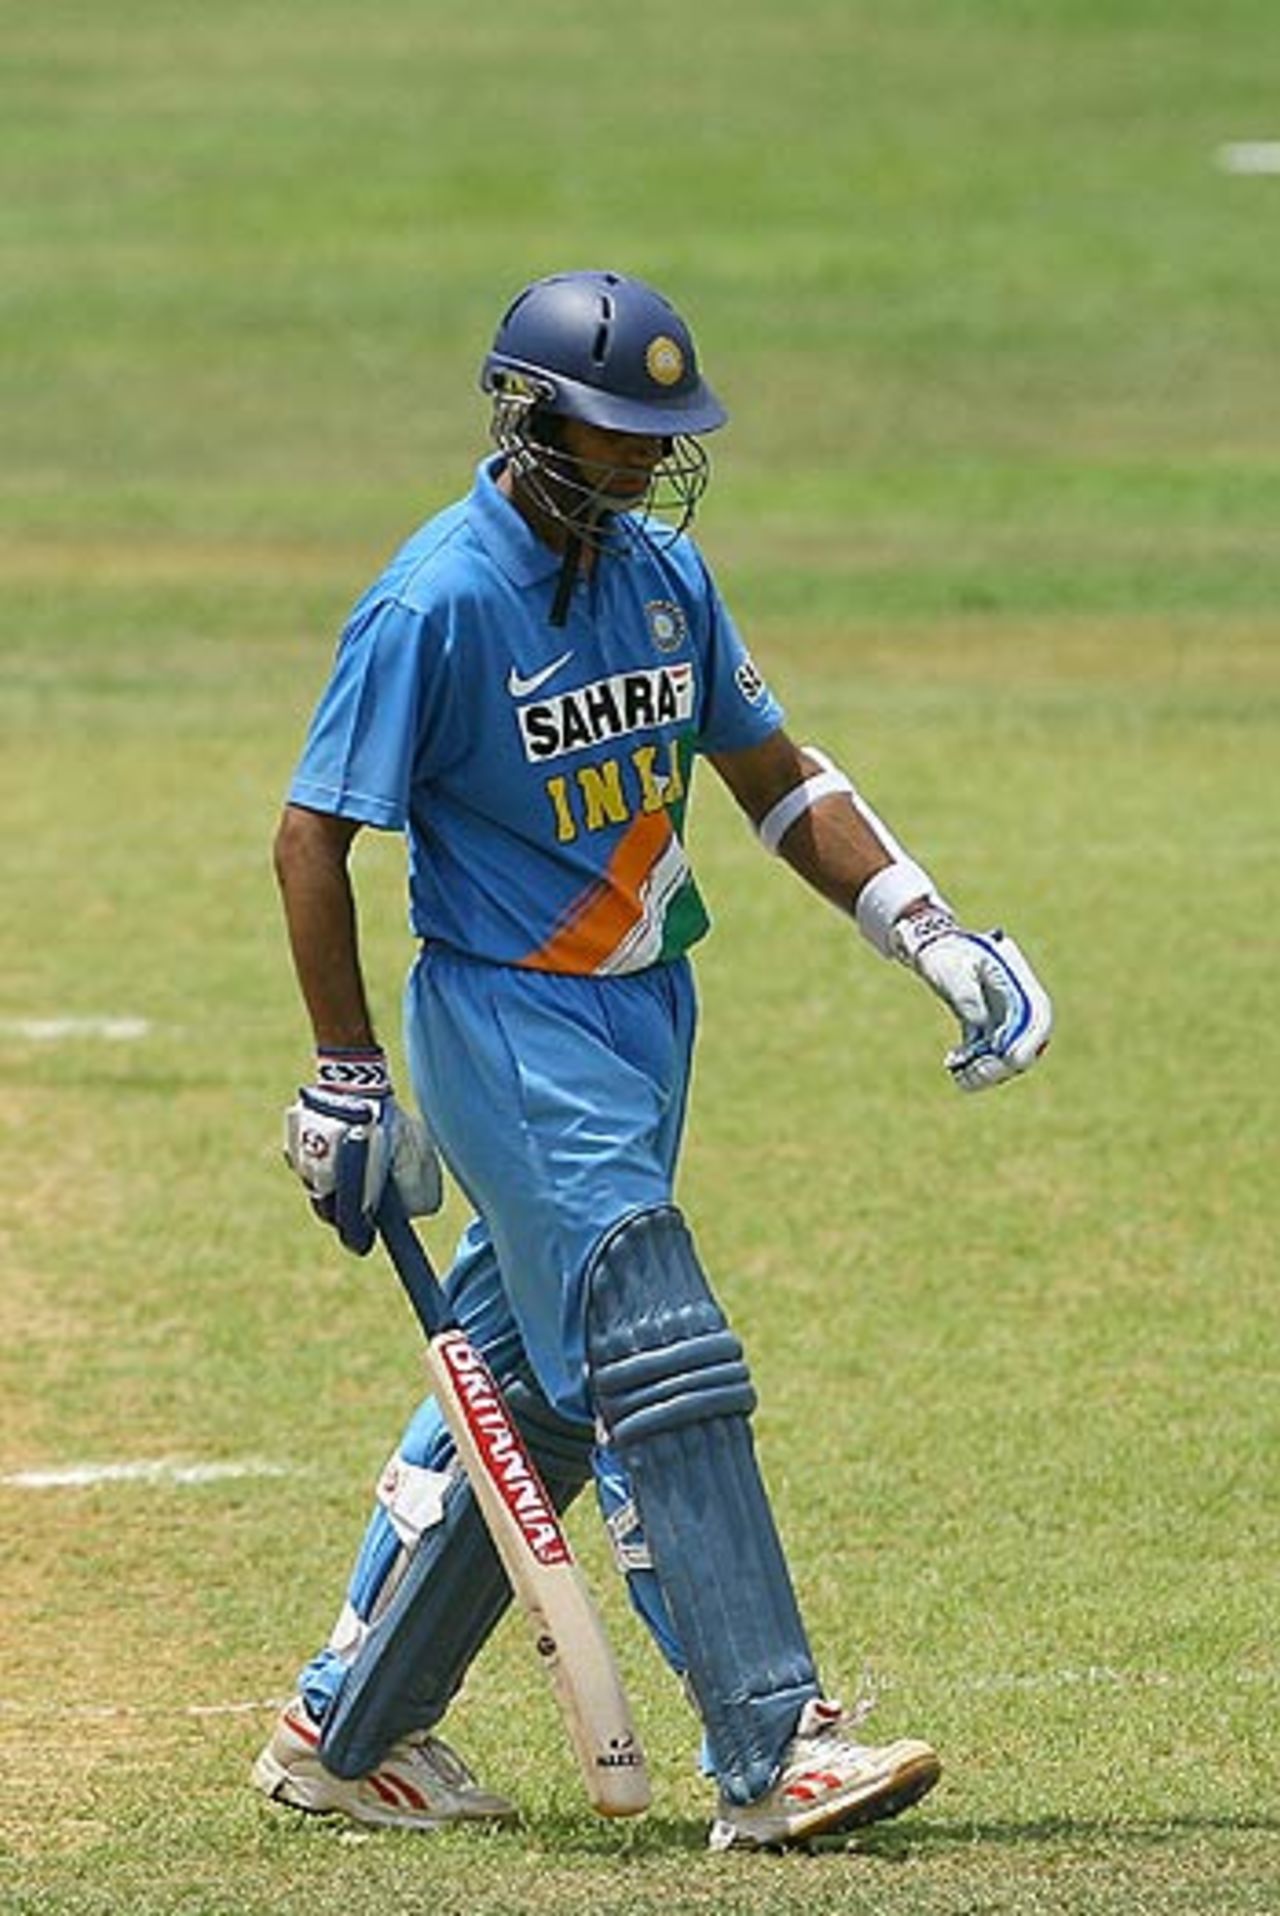 Rahul Dravid departs for 31 during India's warm-up match against Jamaica, Jamaica v Indians, Montego Bay, May 16, 2006